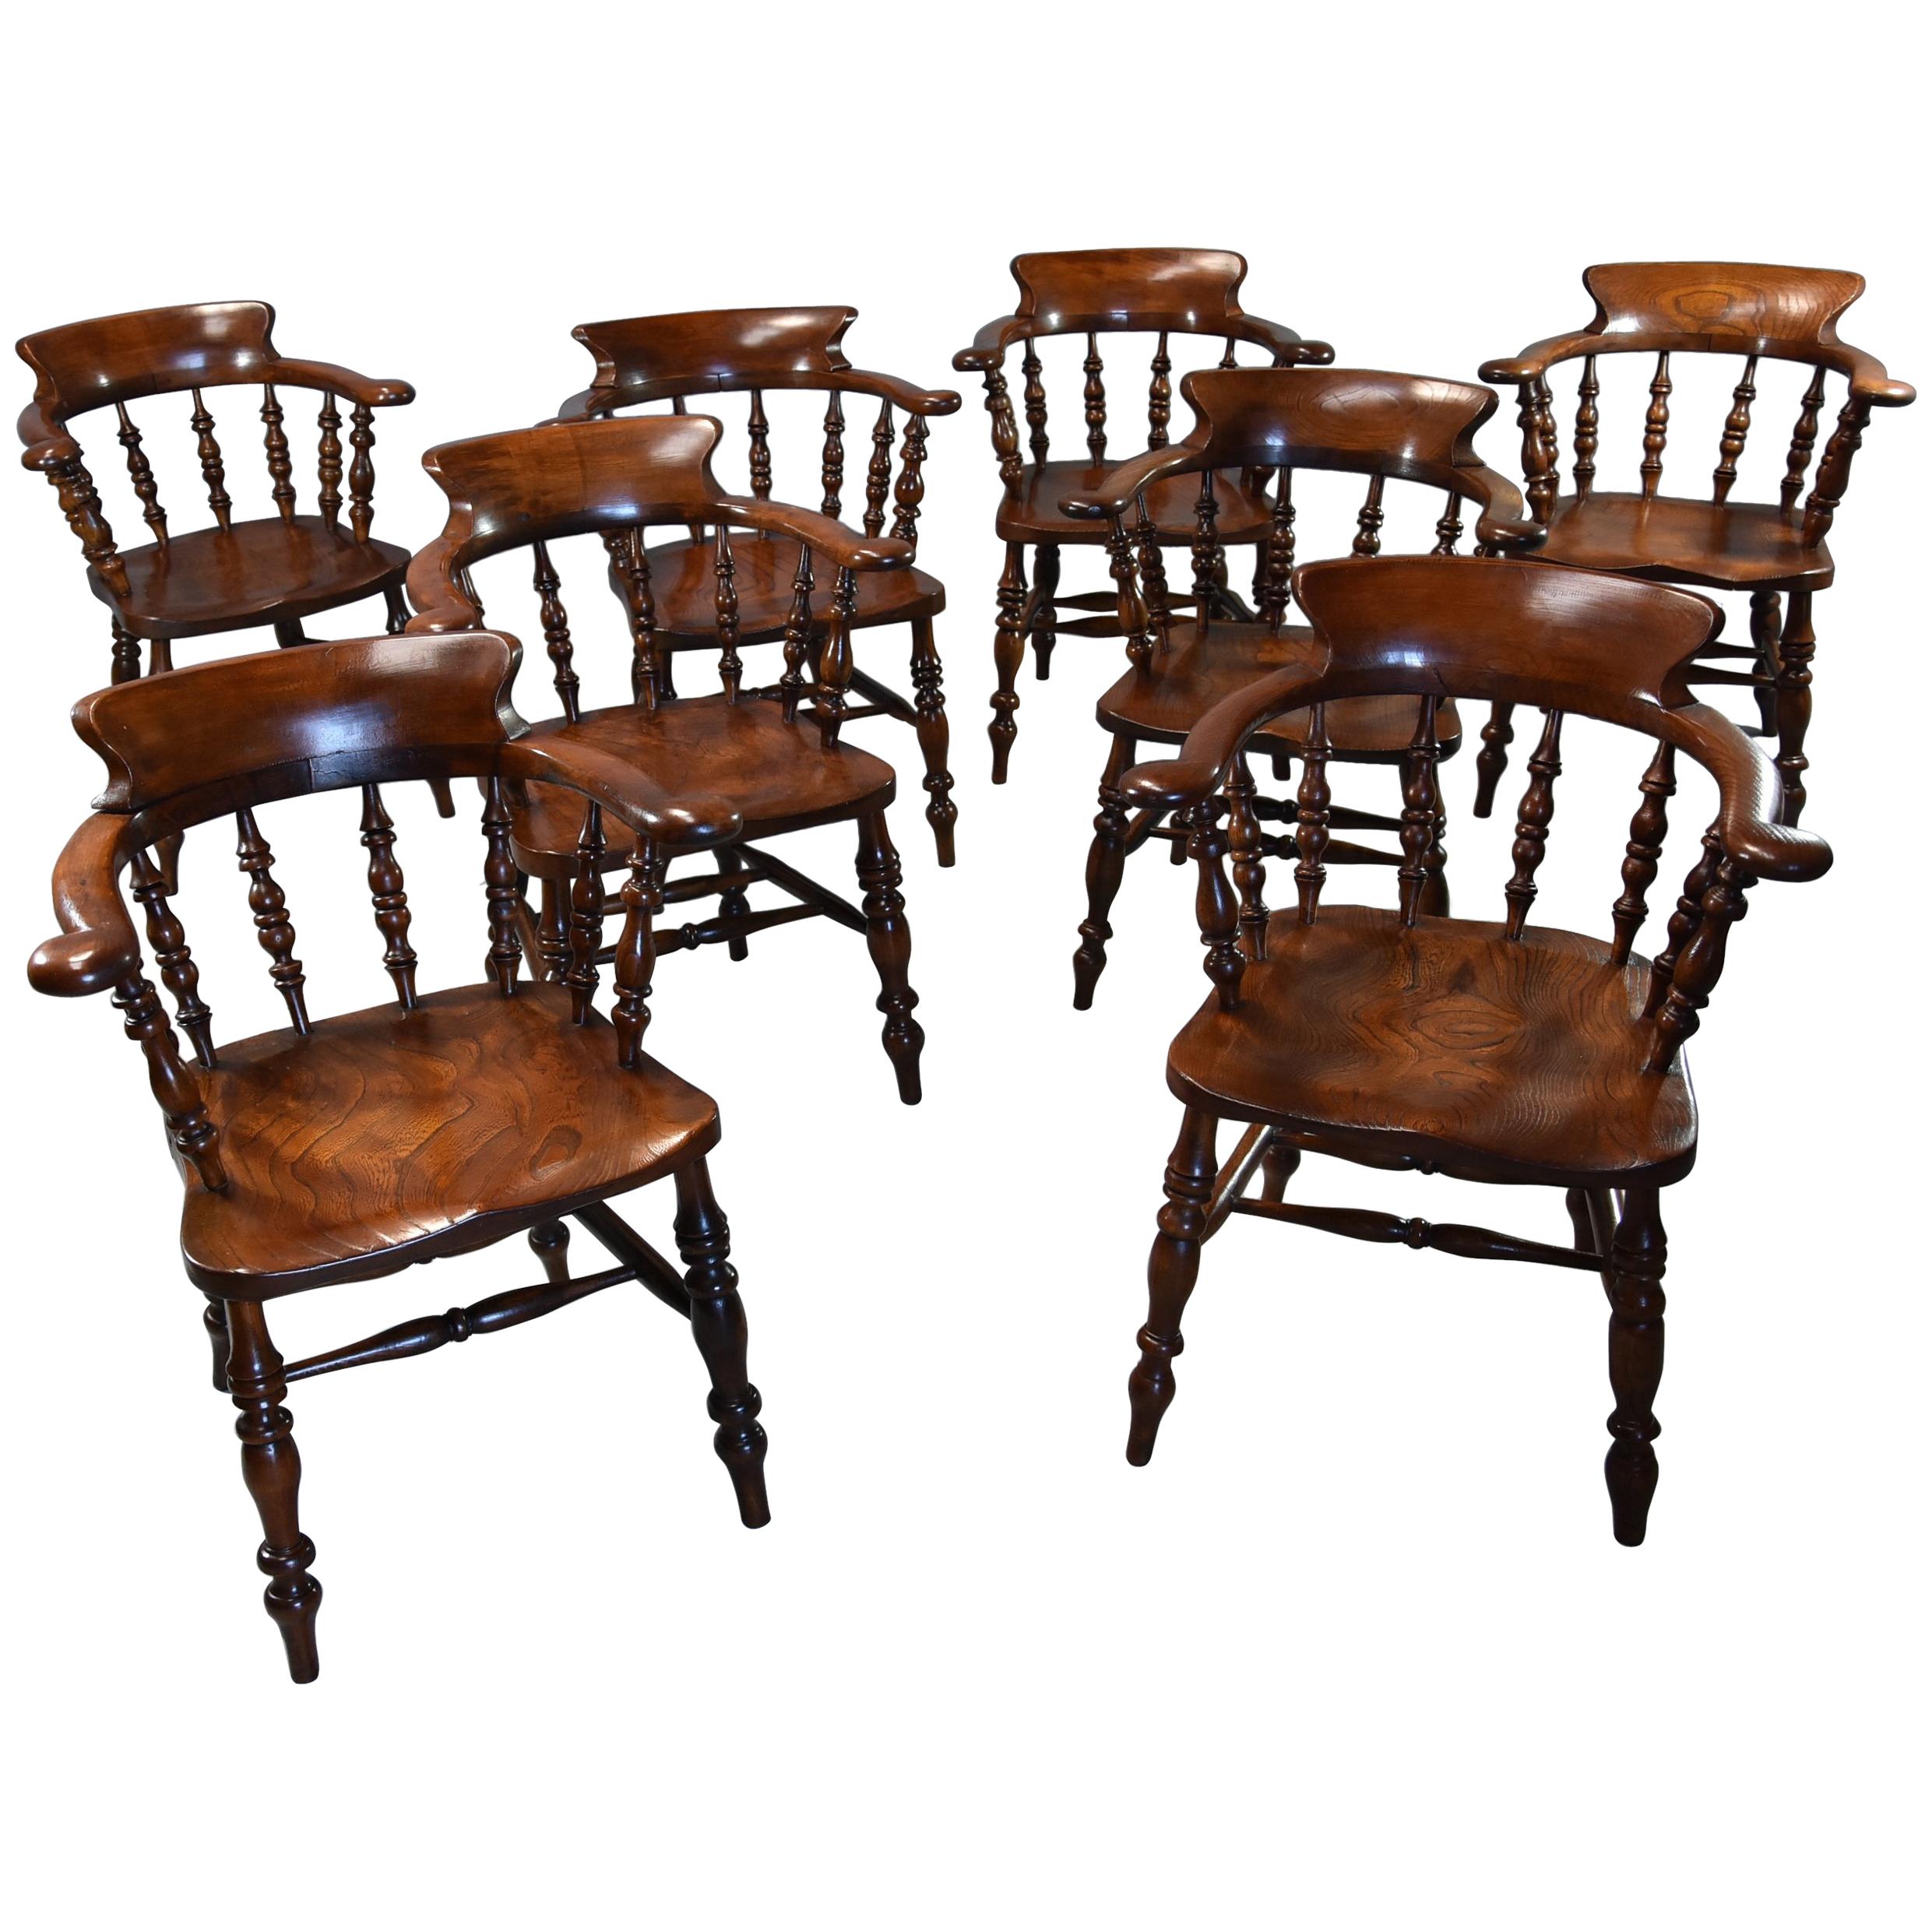 Large Set of Eight Mid-19th Century Smokers Bow Windsor Chairs or Office Chairs